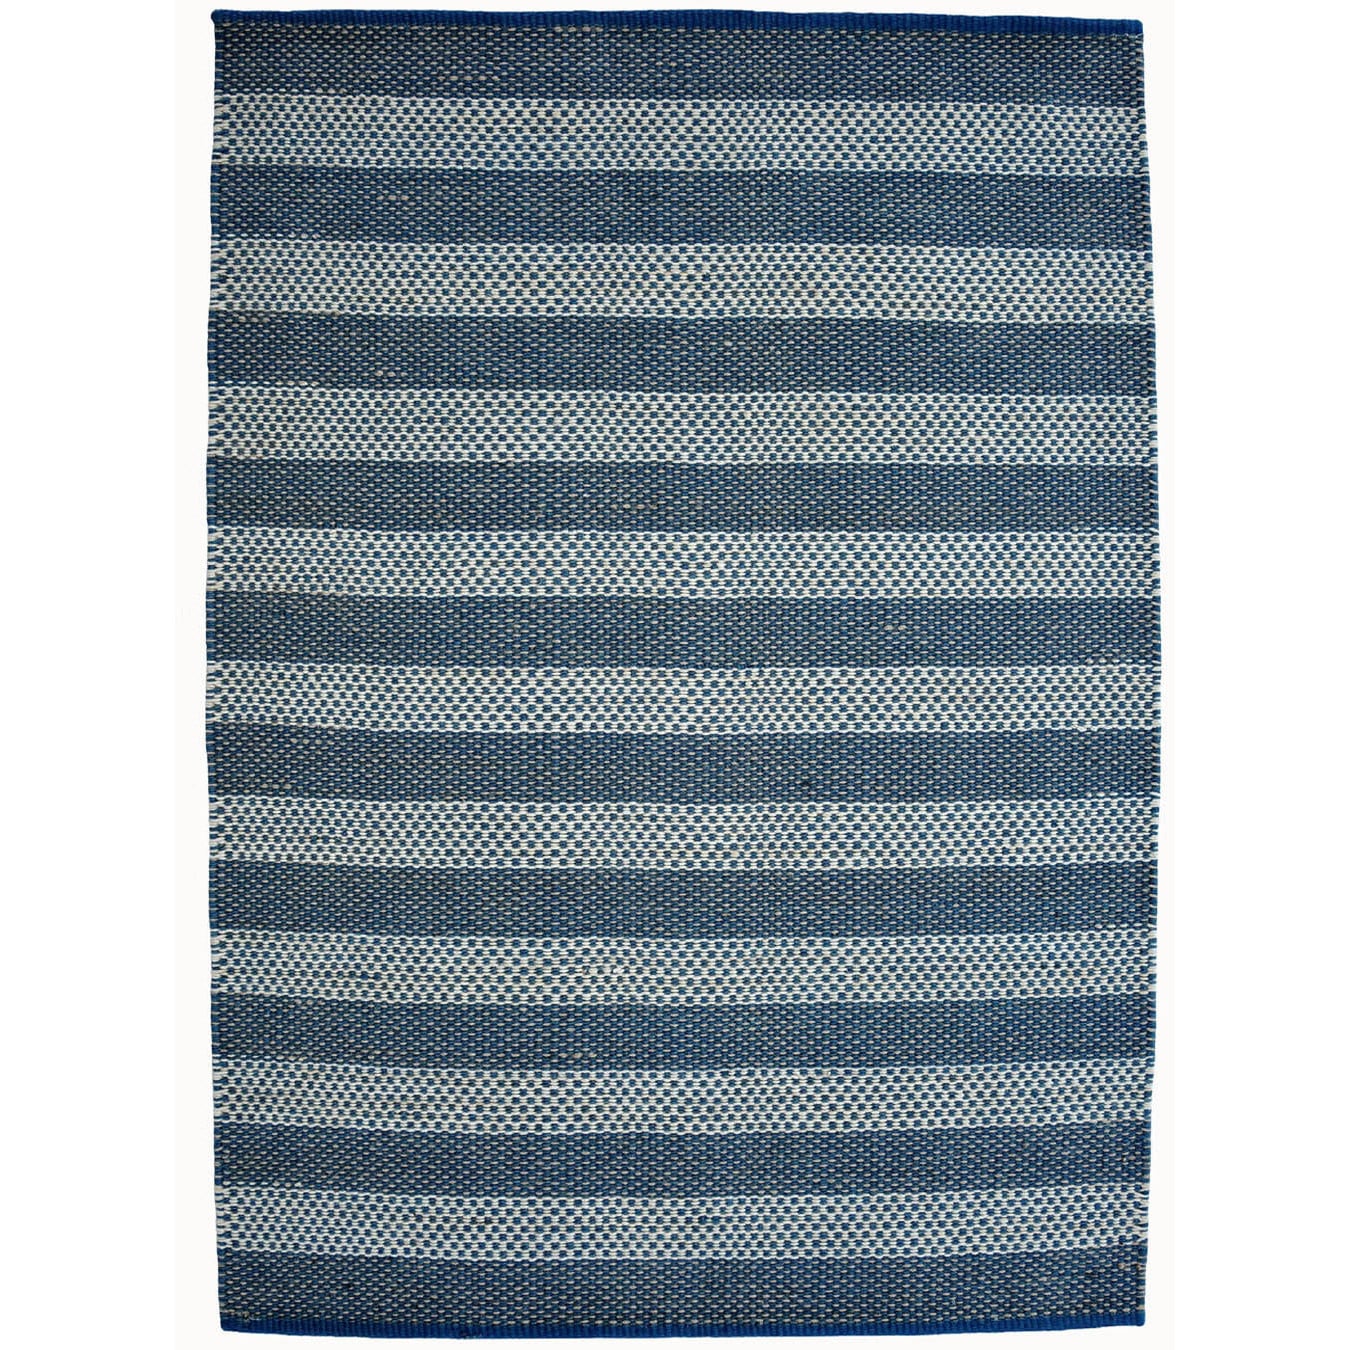 Hand woven Blue Contemporary Tie Die Rug (5 X 8)